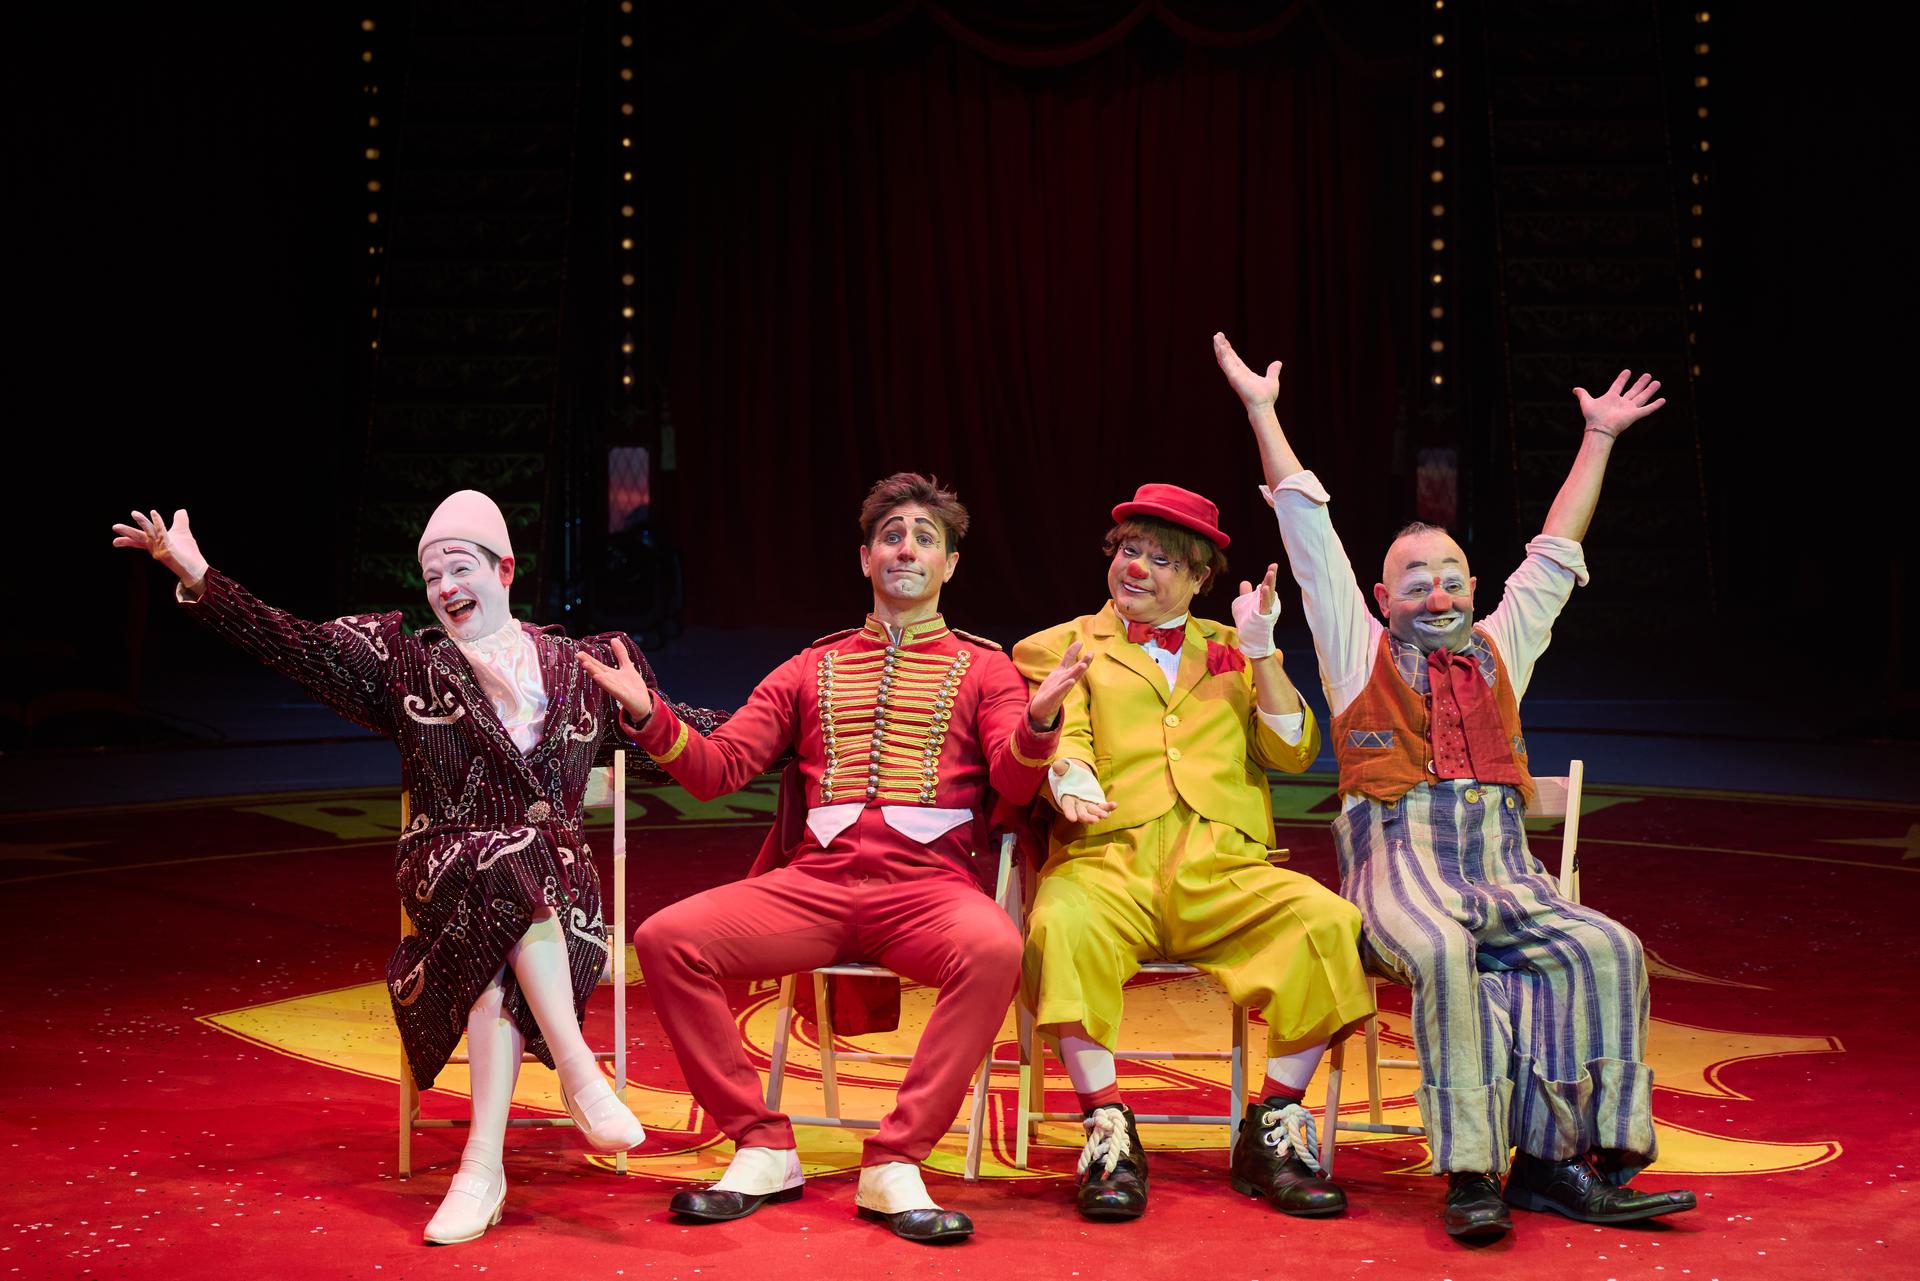 four clown sitting on a red stage